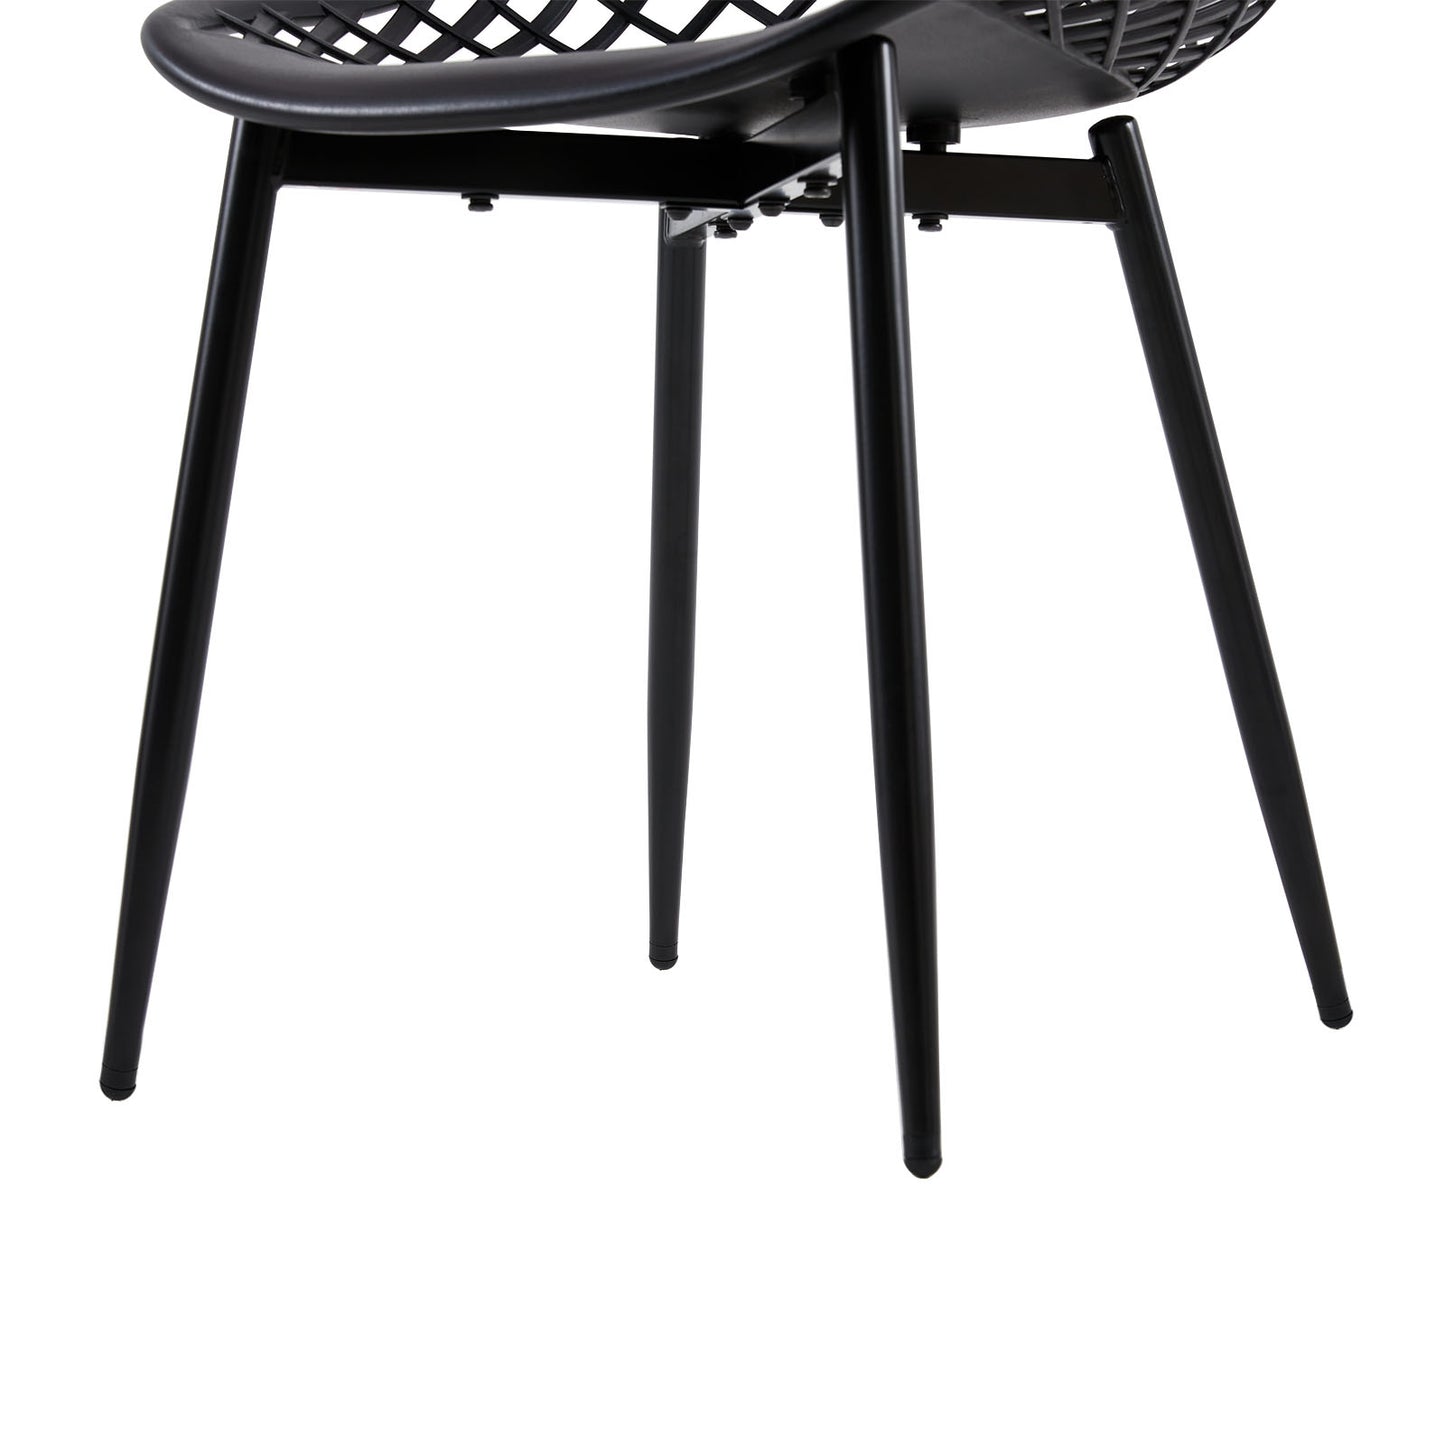 MILAN Hollow Chair with Iron Legs - Black